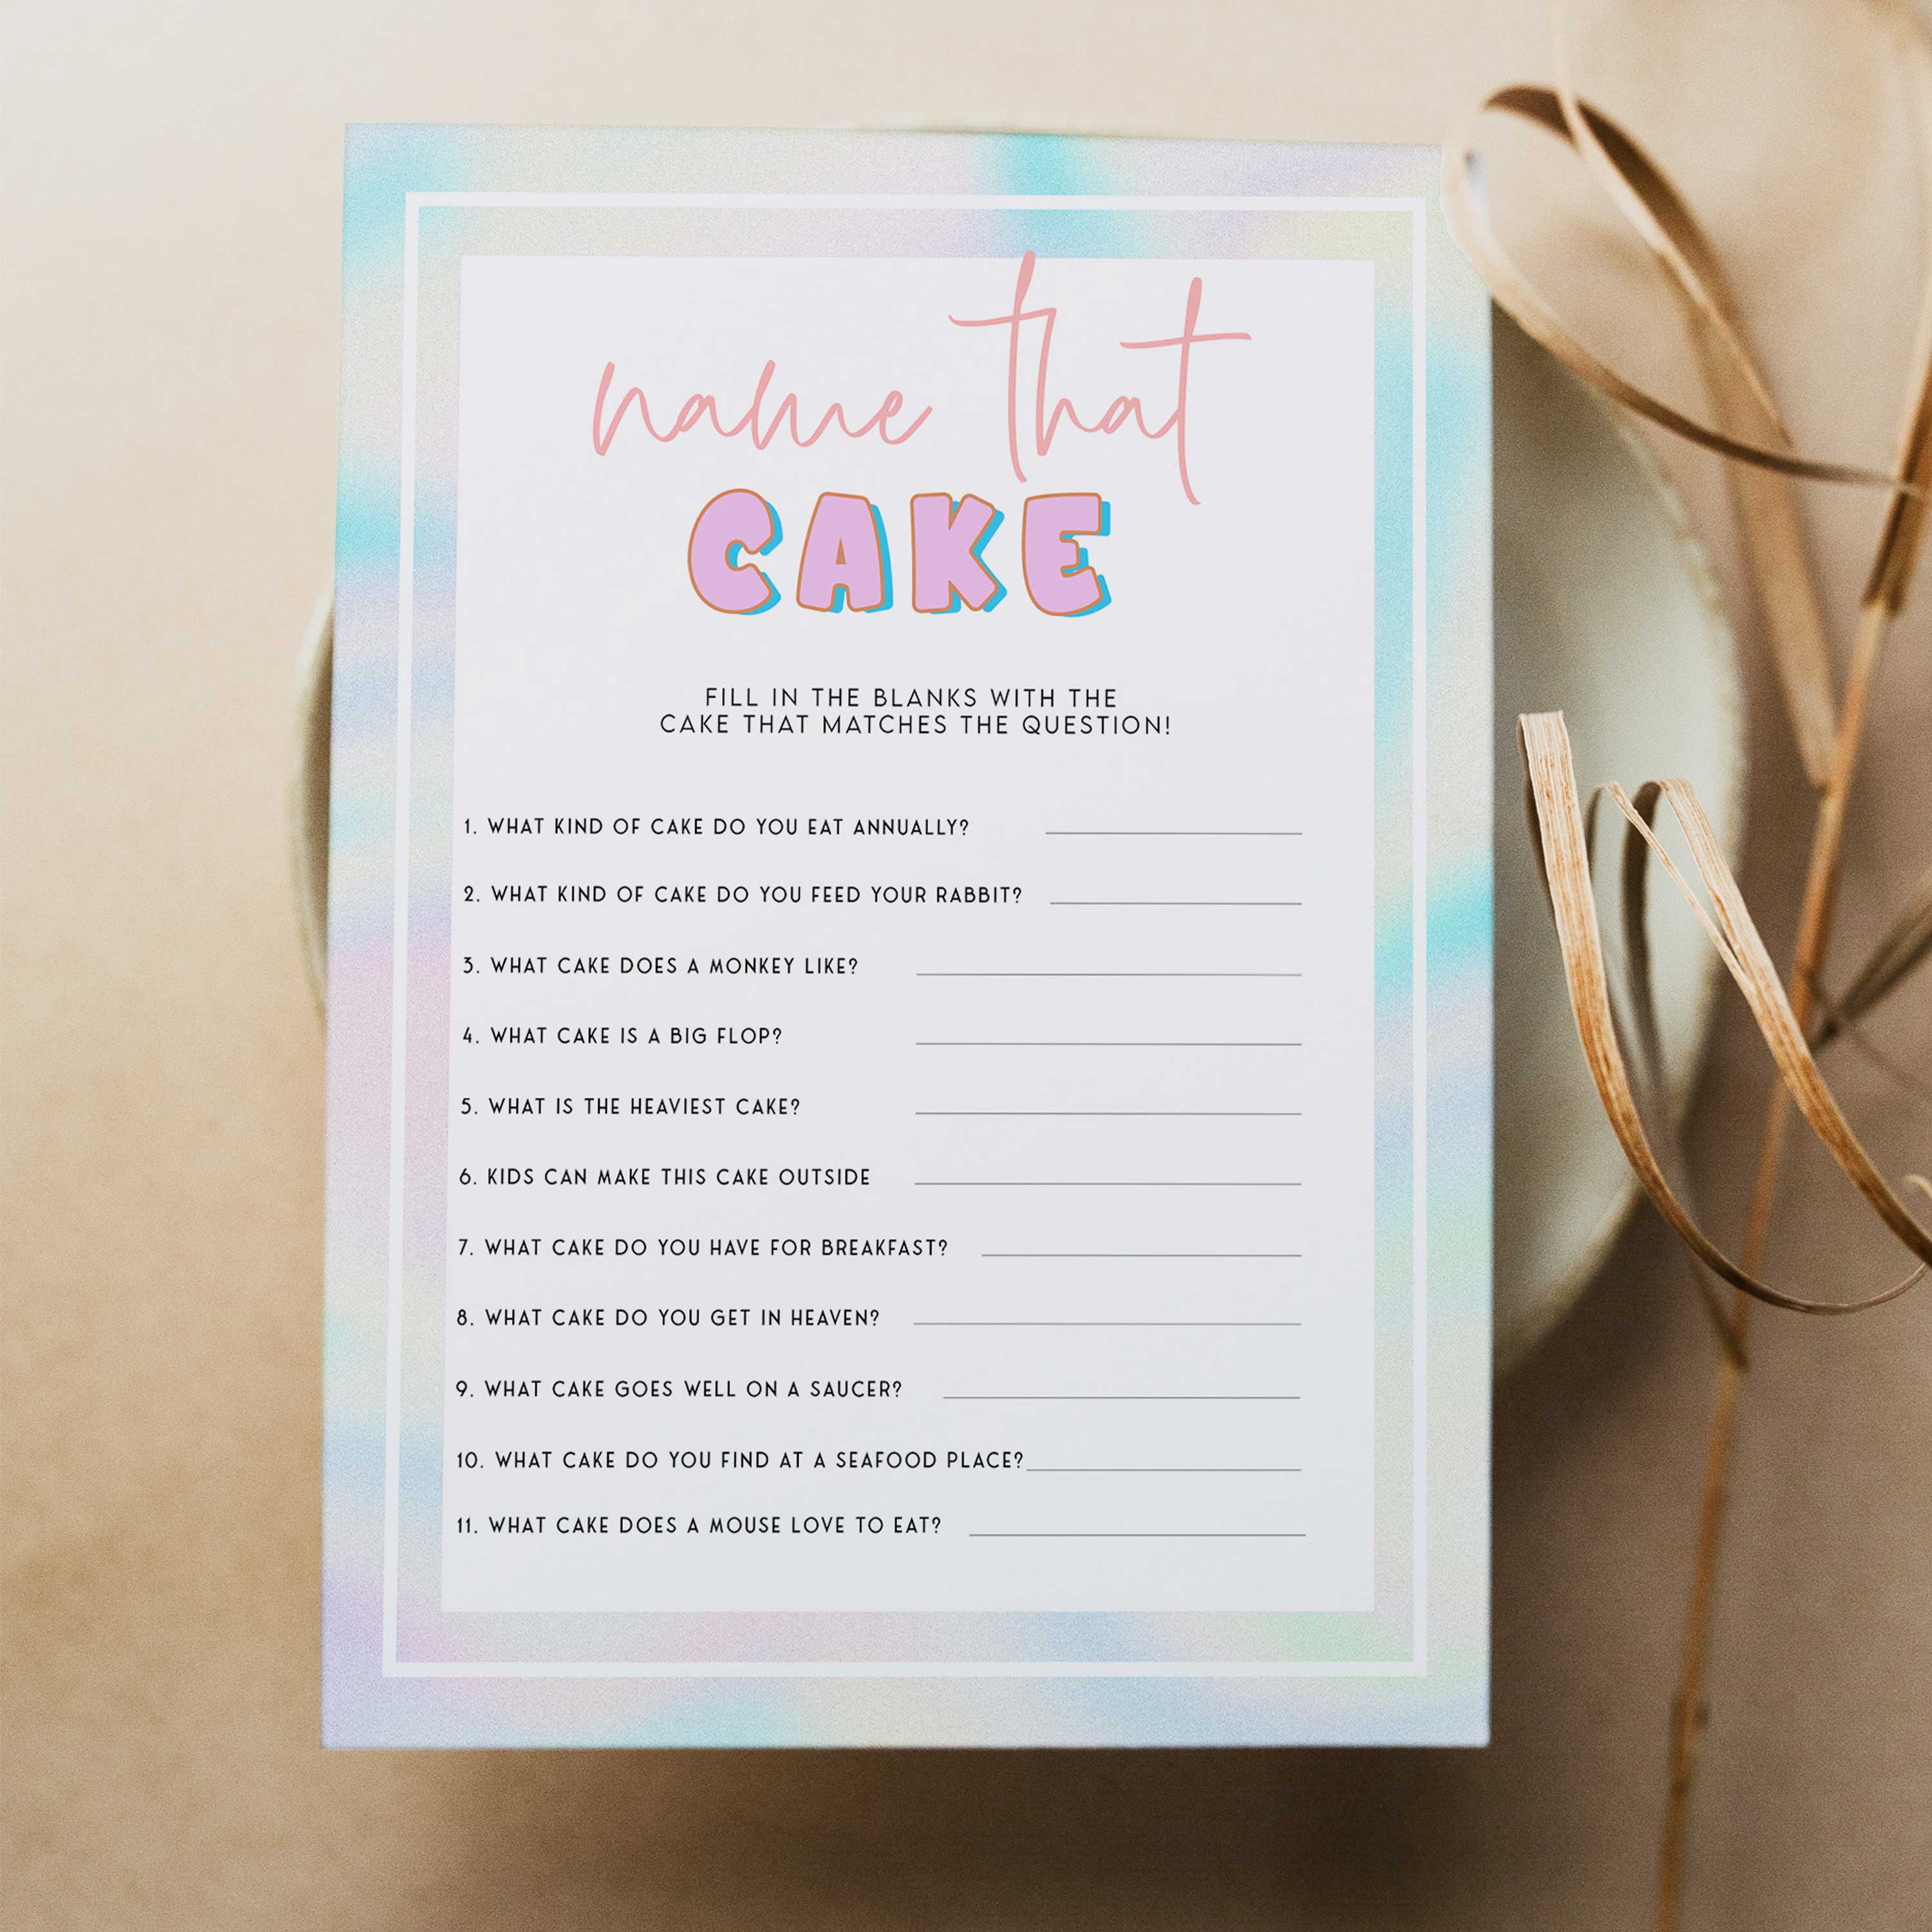 name that cake bridal game, Space cowgirl bridal shower games, printable bridal shower games, bridal games, bridal shower games, disco bridal games